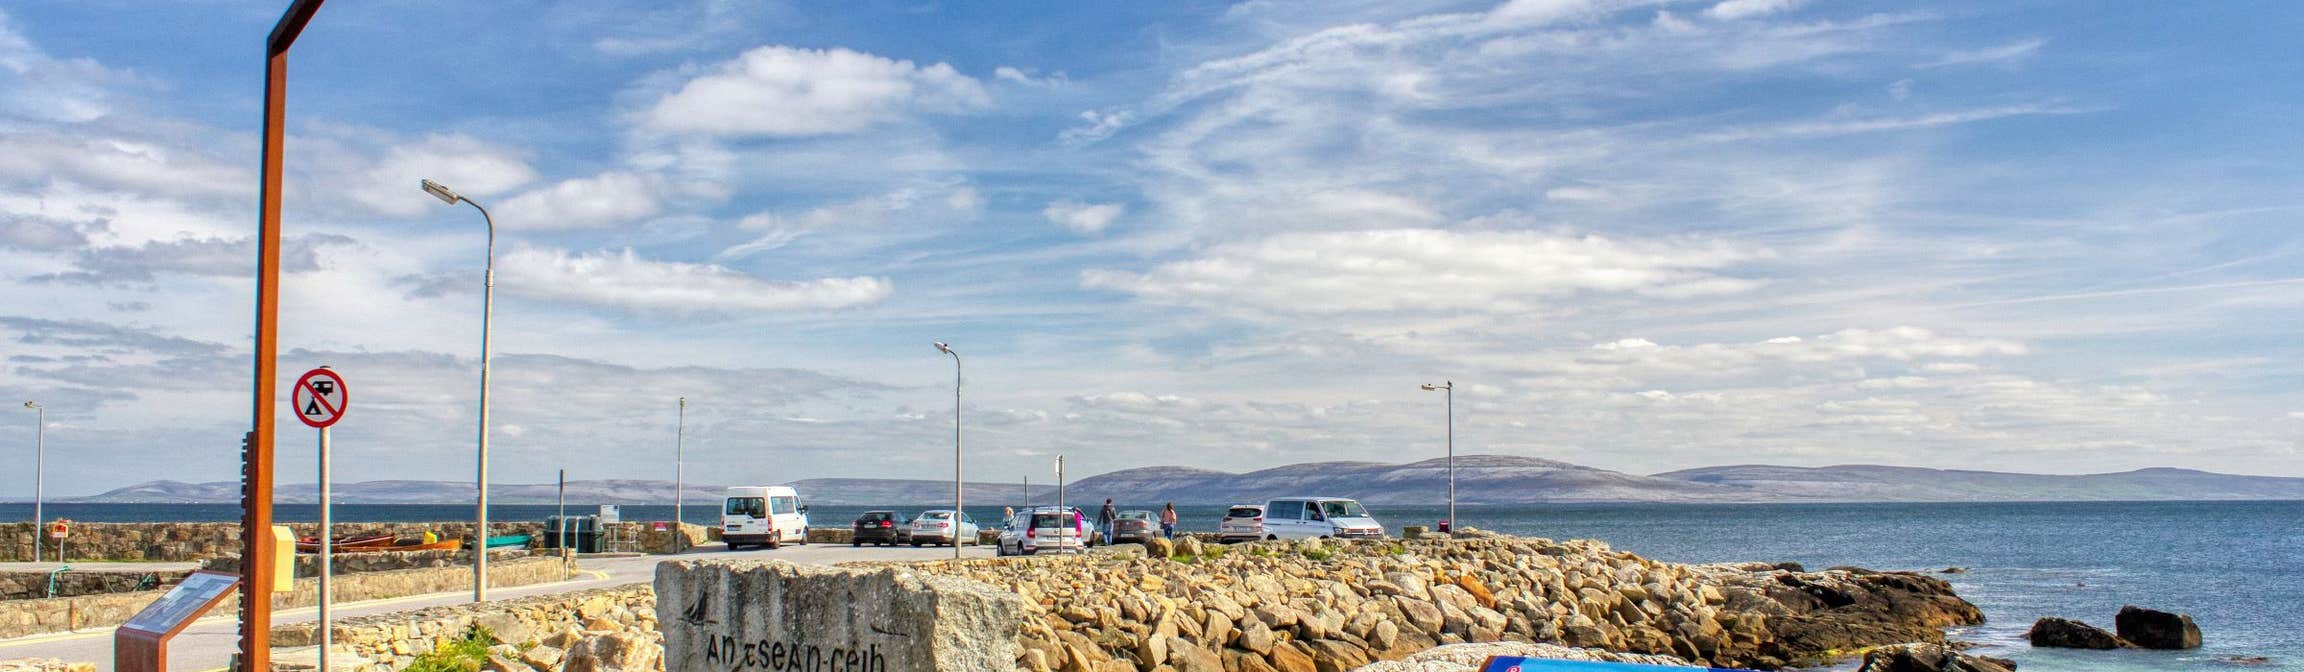 Image of the pier in Spiddal in County Galway